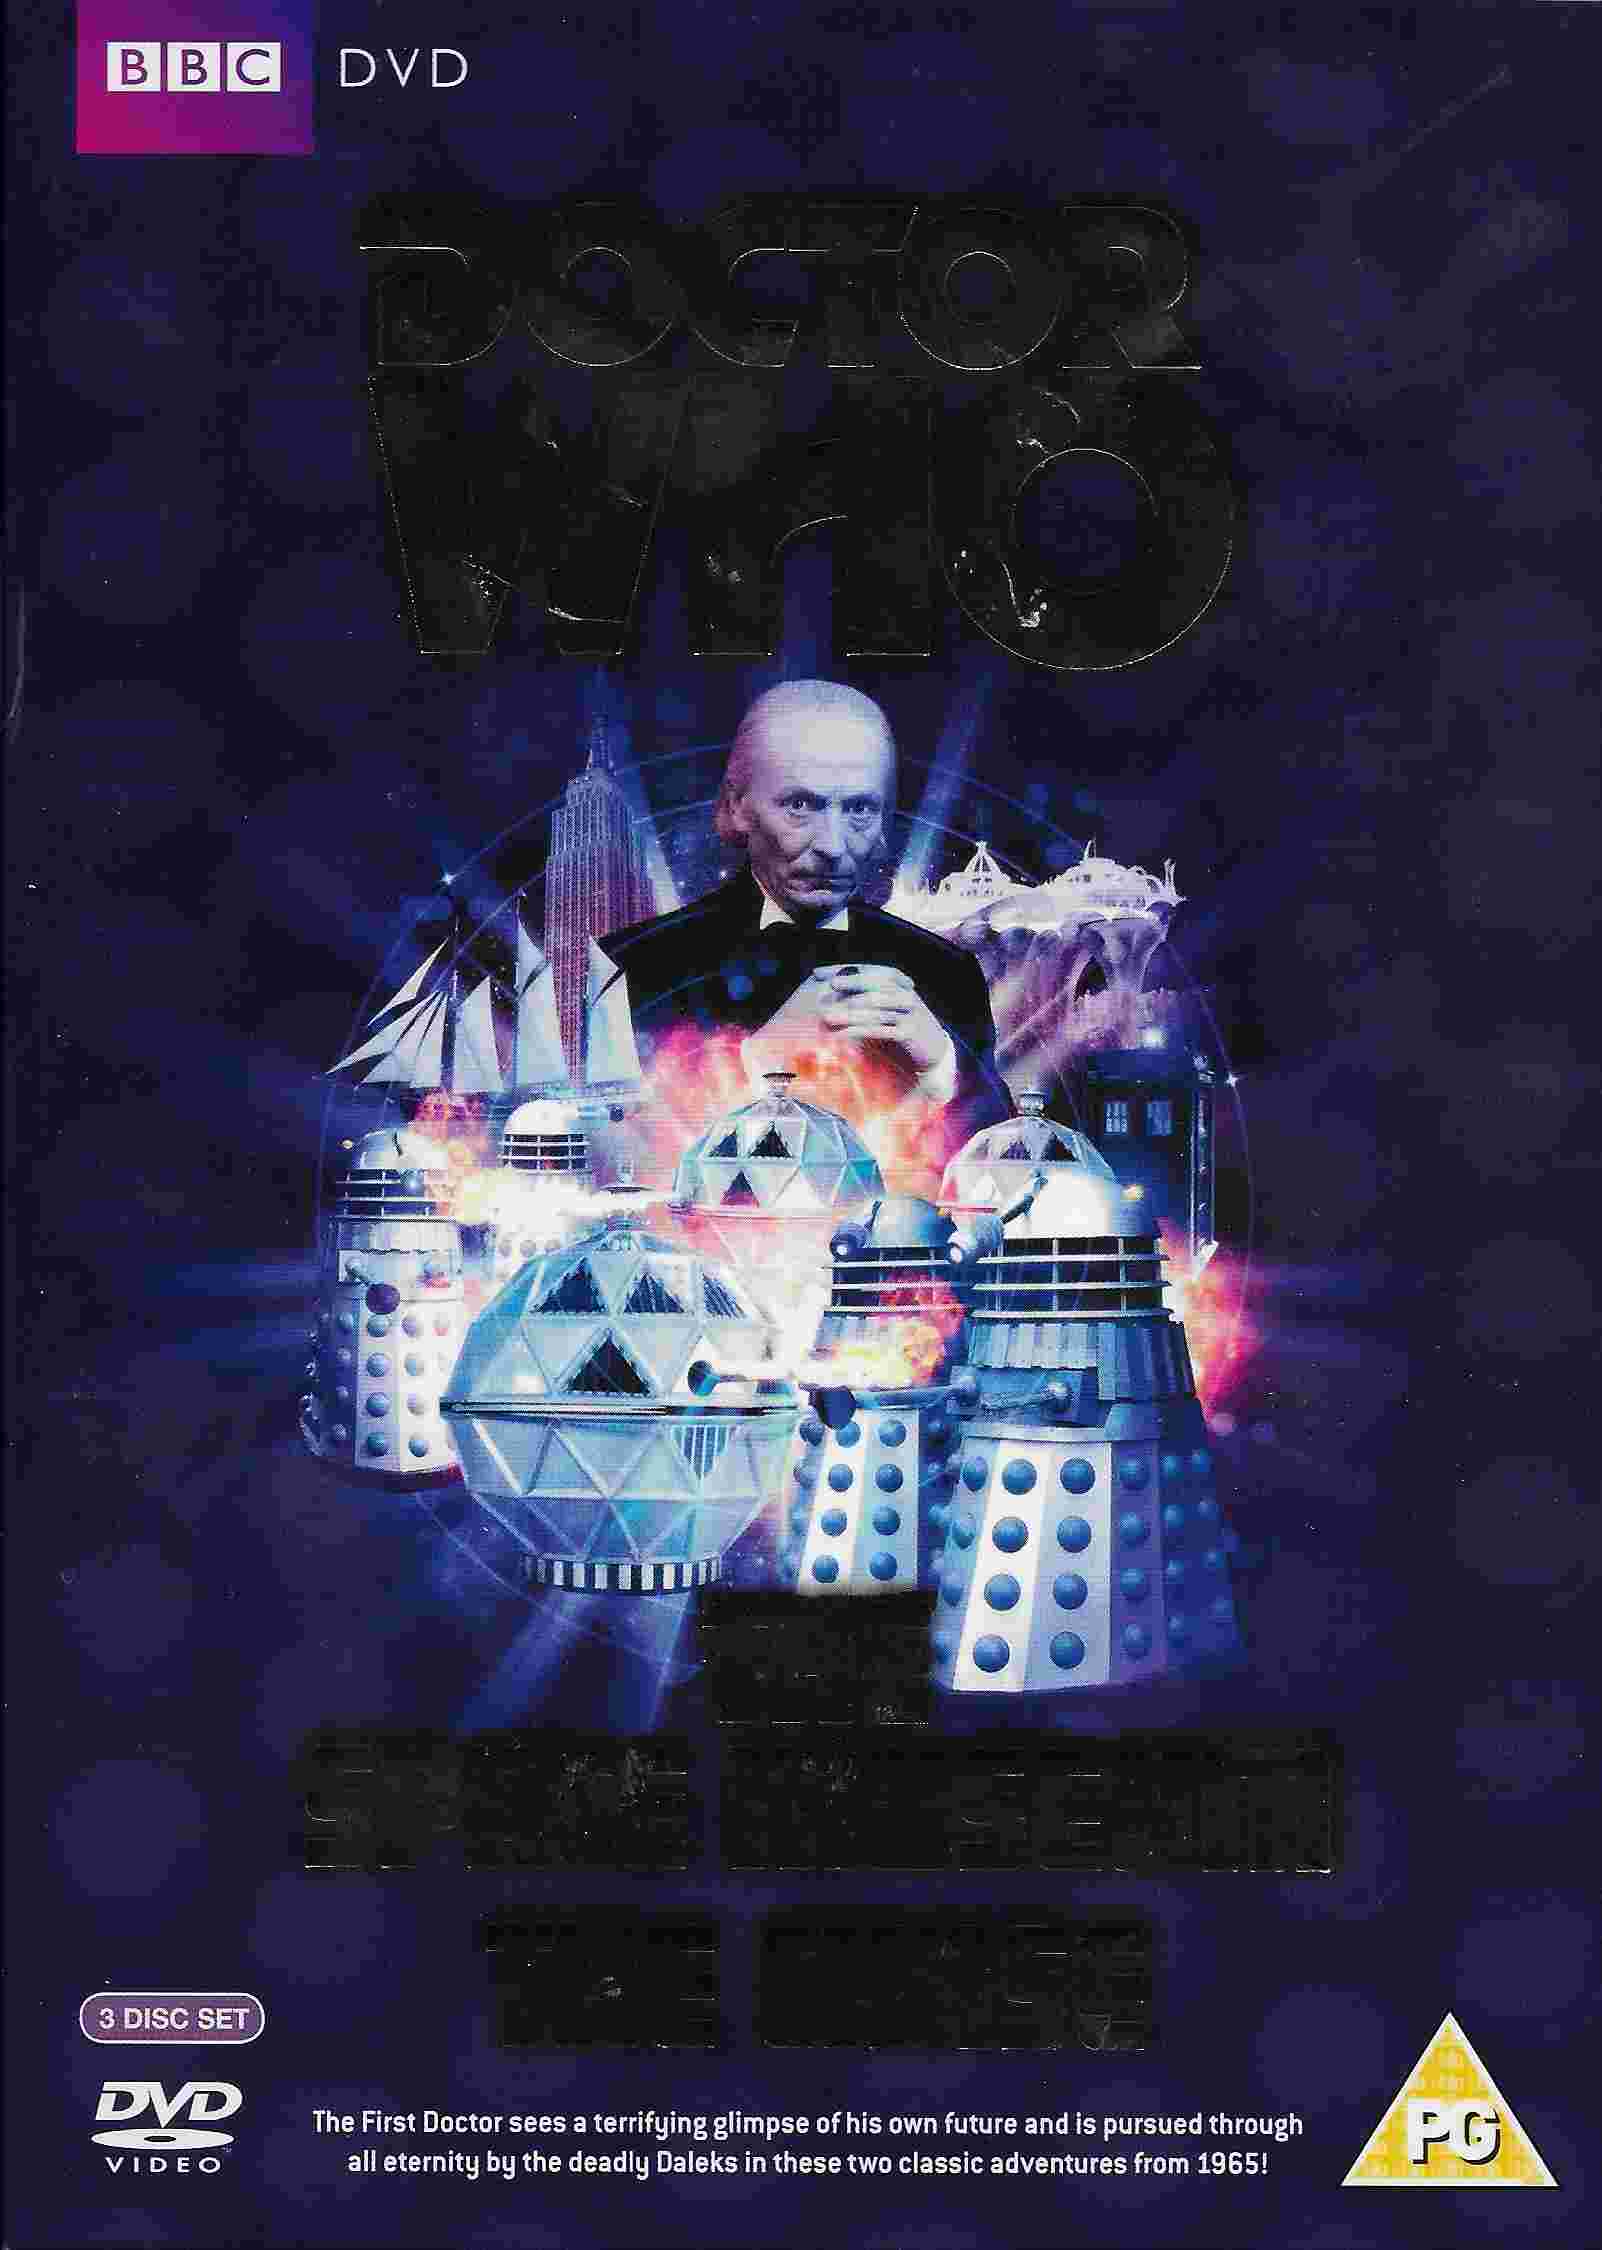 Picture of BBCDVD 2809 Doctor Who - The space museum / The chase by artist Glyn Jones / Terry Nation from the BBC records and Tapes library